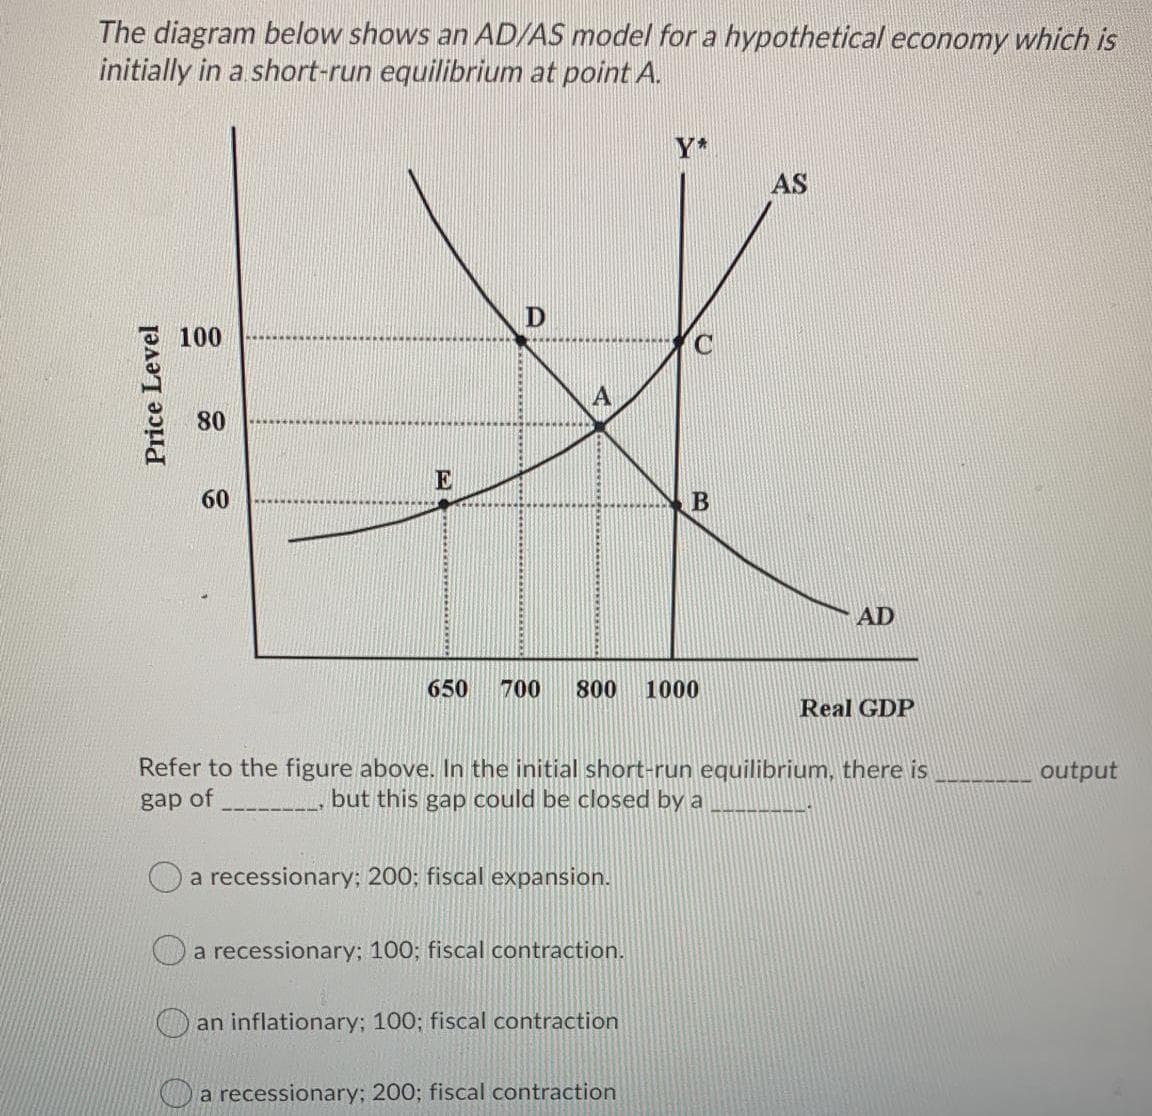 The diagram below shows an AD/AS model for a hypothetical economy which is
initially in a short-run equilibrium at point A.
Y*
AS
D
100
80
E
60
AD
650
700
800
1000
Real GDP
Refer to the figure above. In the initial short-run equilibrium, there is
but this gap could be closed by a
output
gap of
a recessionary; 200; fiscal expansion.
a recessionary; 100; fiscal contraction.
an inflationary; 100; fiscal contraction
O a recessionary; 200; fiscal contraction
Price Level
